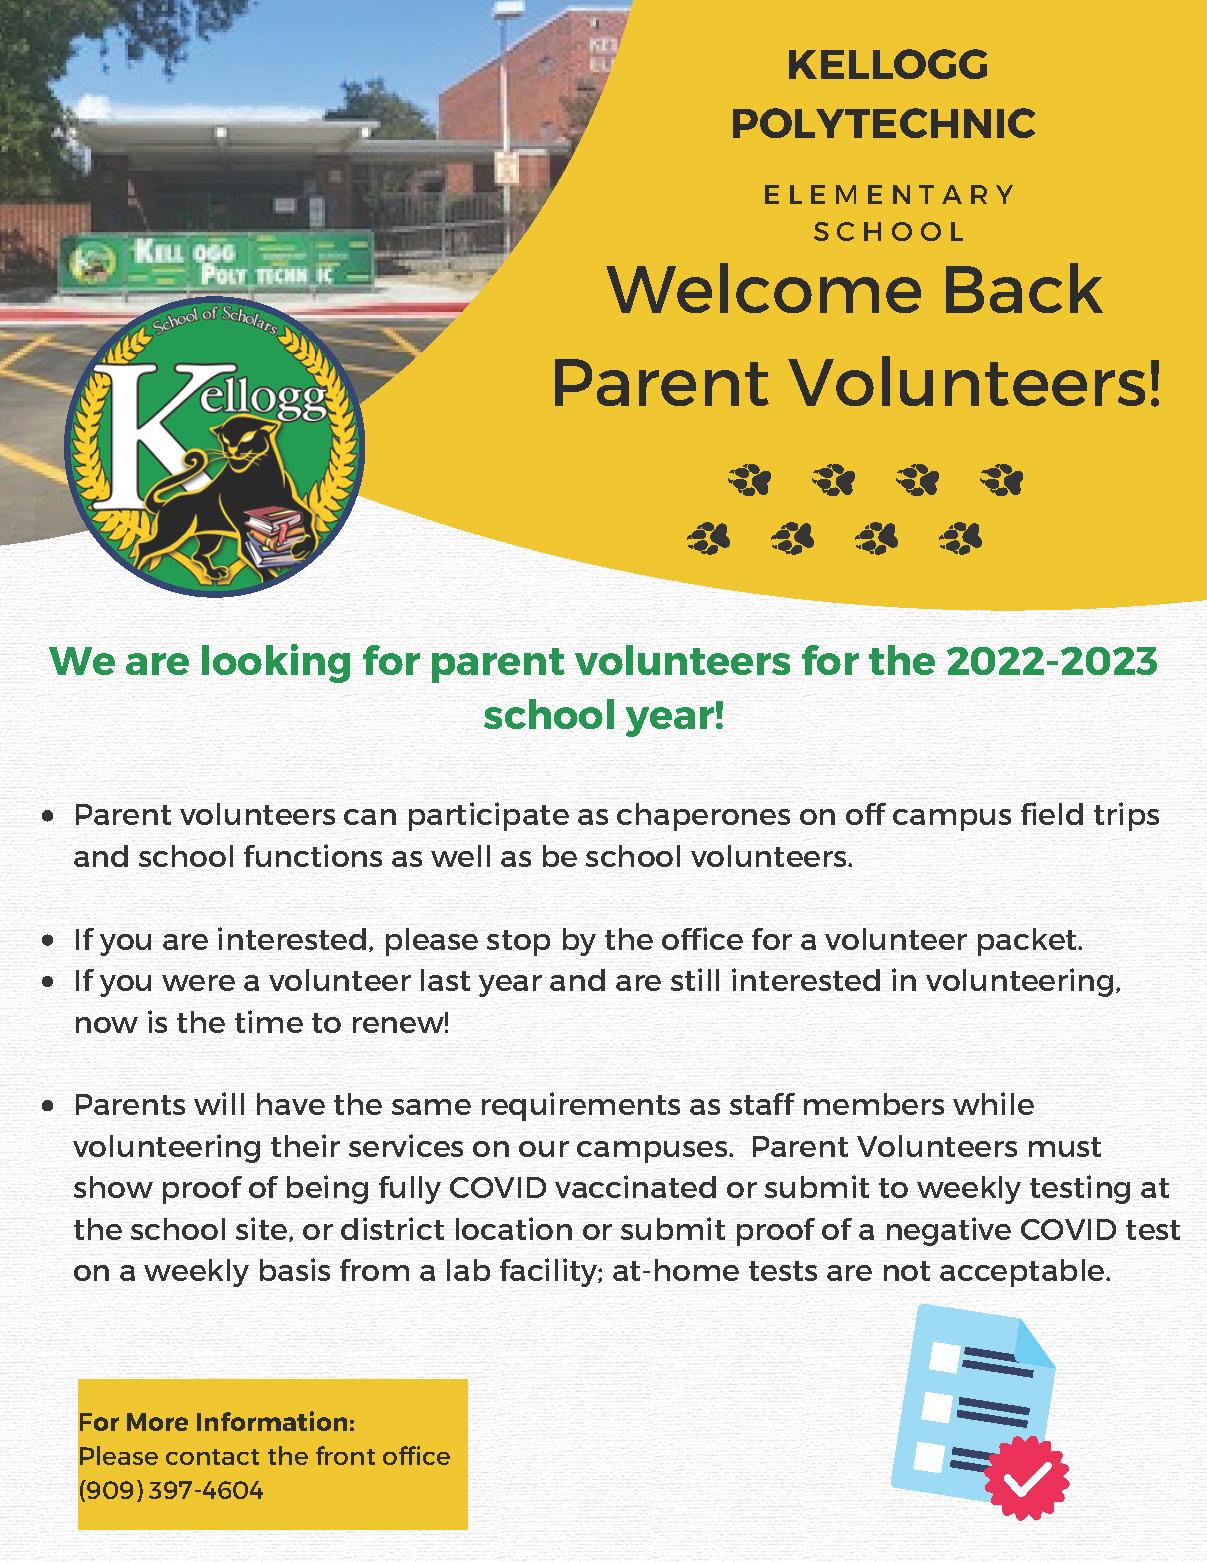 Parent volunteers can participate as chaperones on off campus field trips and school functions as well as be school volunteers. If you are interested, please stop by the office for a volunteer packet. If you were a volunteer last year and are still interested in volunteering, now is the time to renew! Parents will have the same requirements as staff members while volunteering their services on our campuses. Parent Volunteers must show proof of being fully COVID vaccinated or submit to weekly testing at the school site, or district location or submit proof of a negative COVID test on a weekly basis from a lab facility; at-home tests are not acceptable. We are looking for parent volunteers for the 2022-2023 school year! Welcome Back Parent Volunteers! KELLOGG POLYTECHNIC E L E M E N T A R Y S C H O O L For More Information: Please contact the front office (909) 397-4604